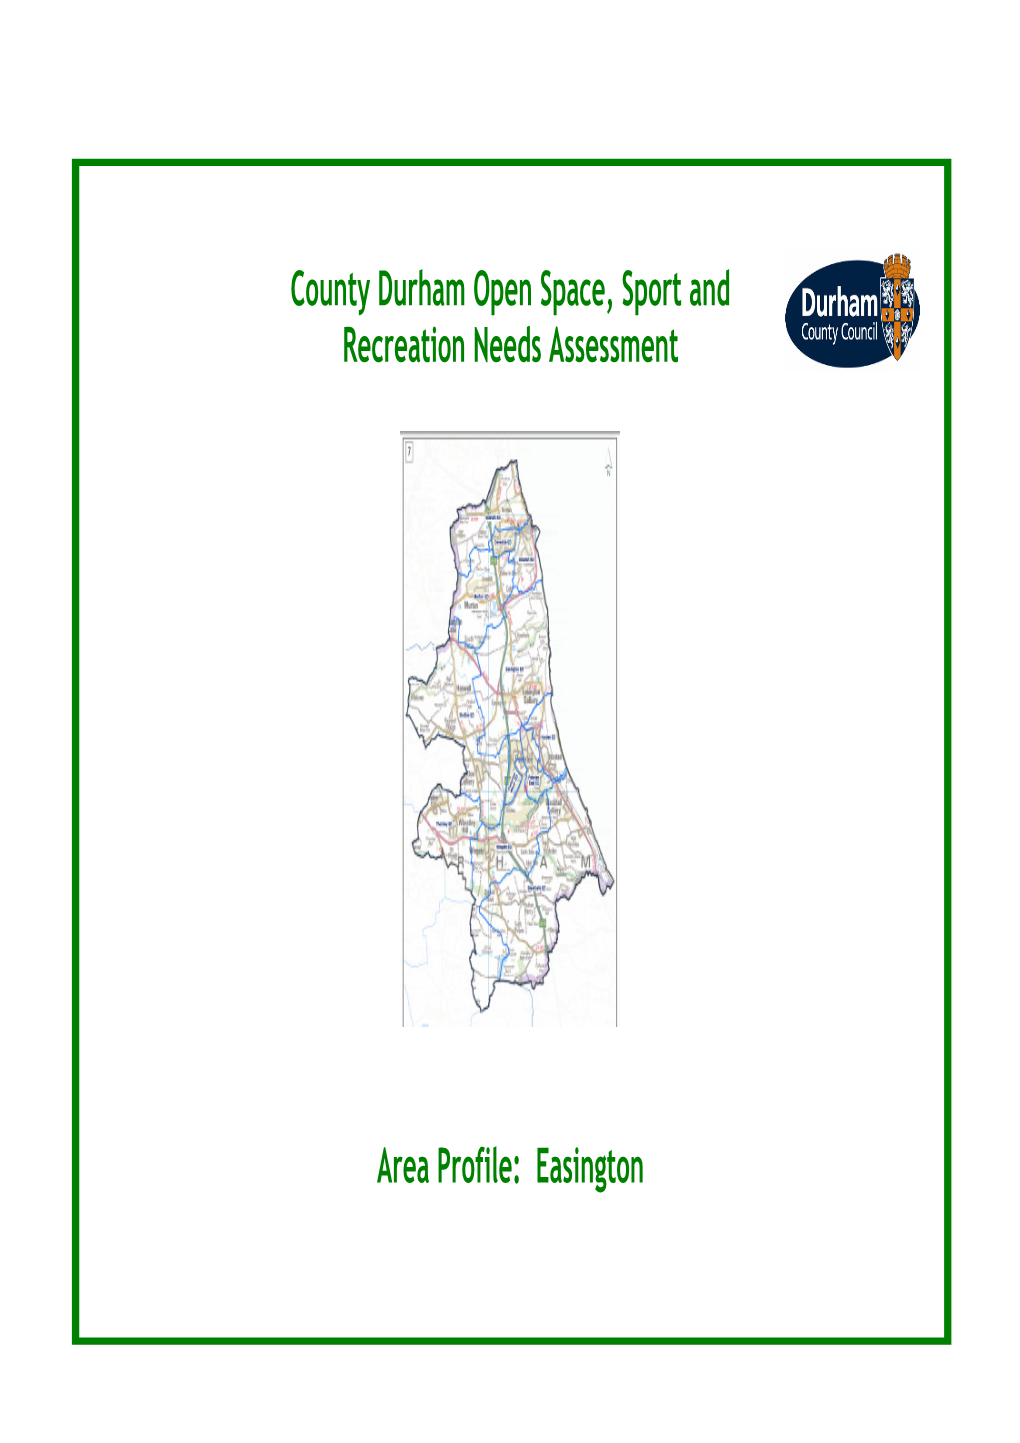 County Durham Open Space, Sport and Recreation Needs Assessment